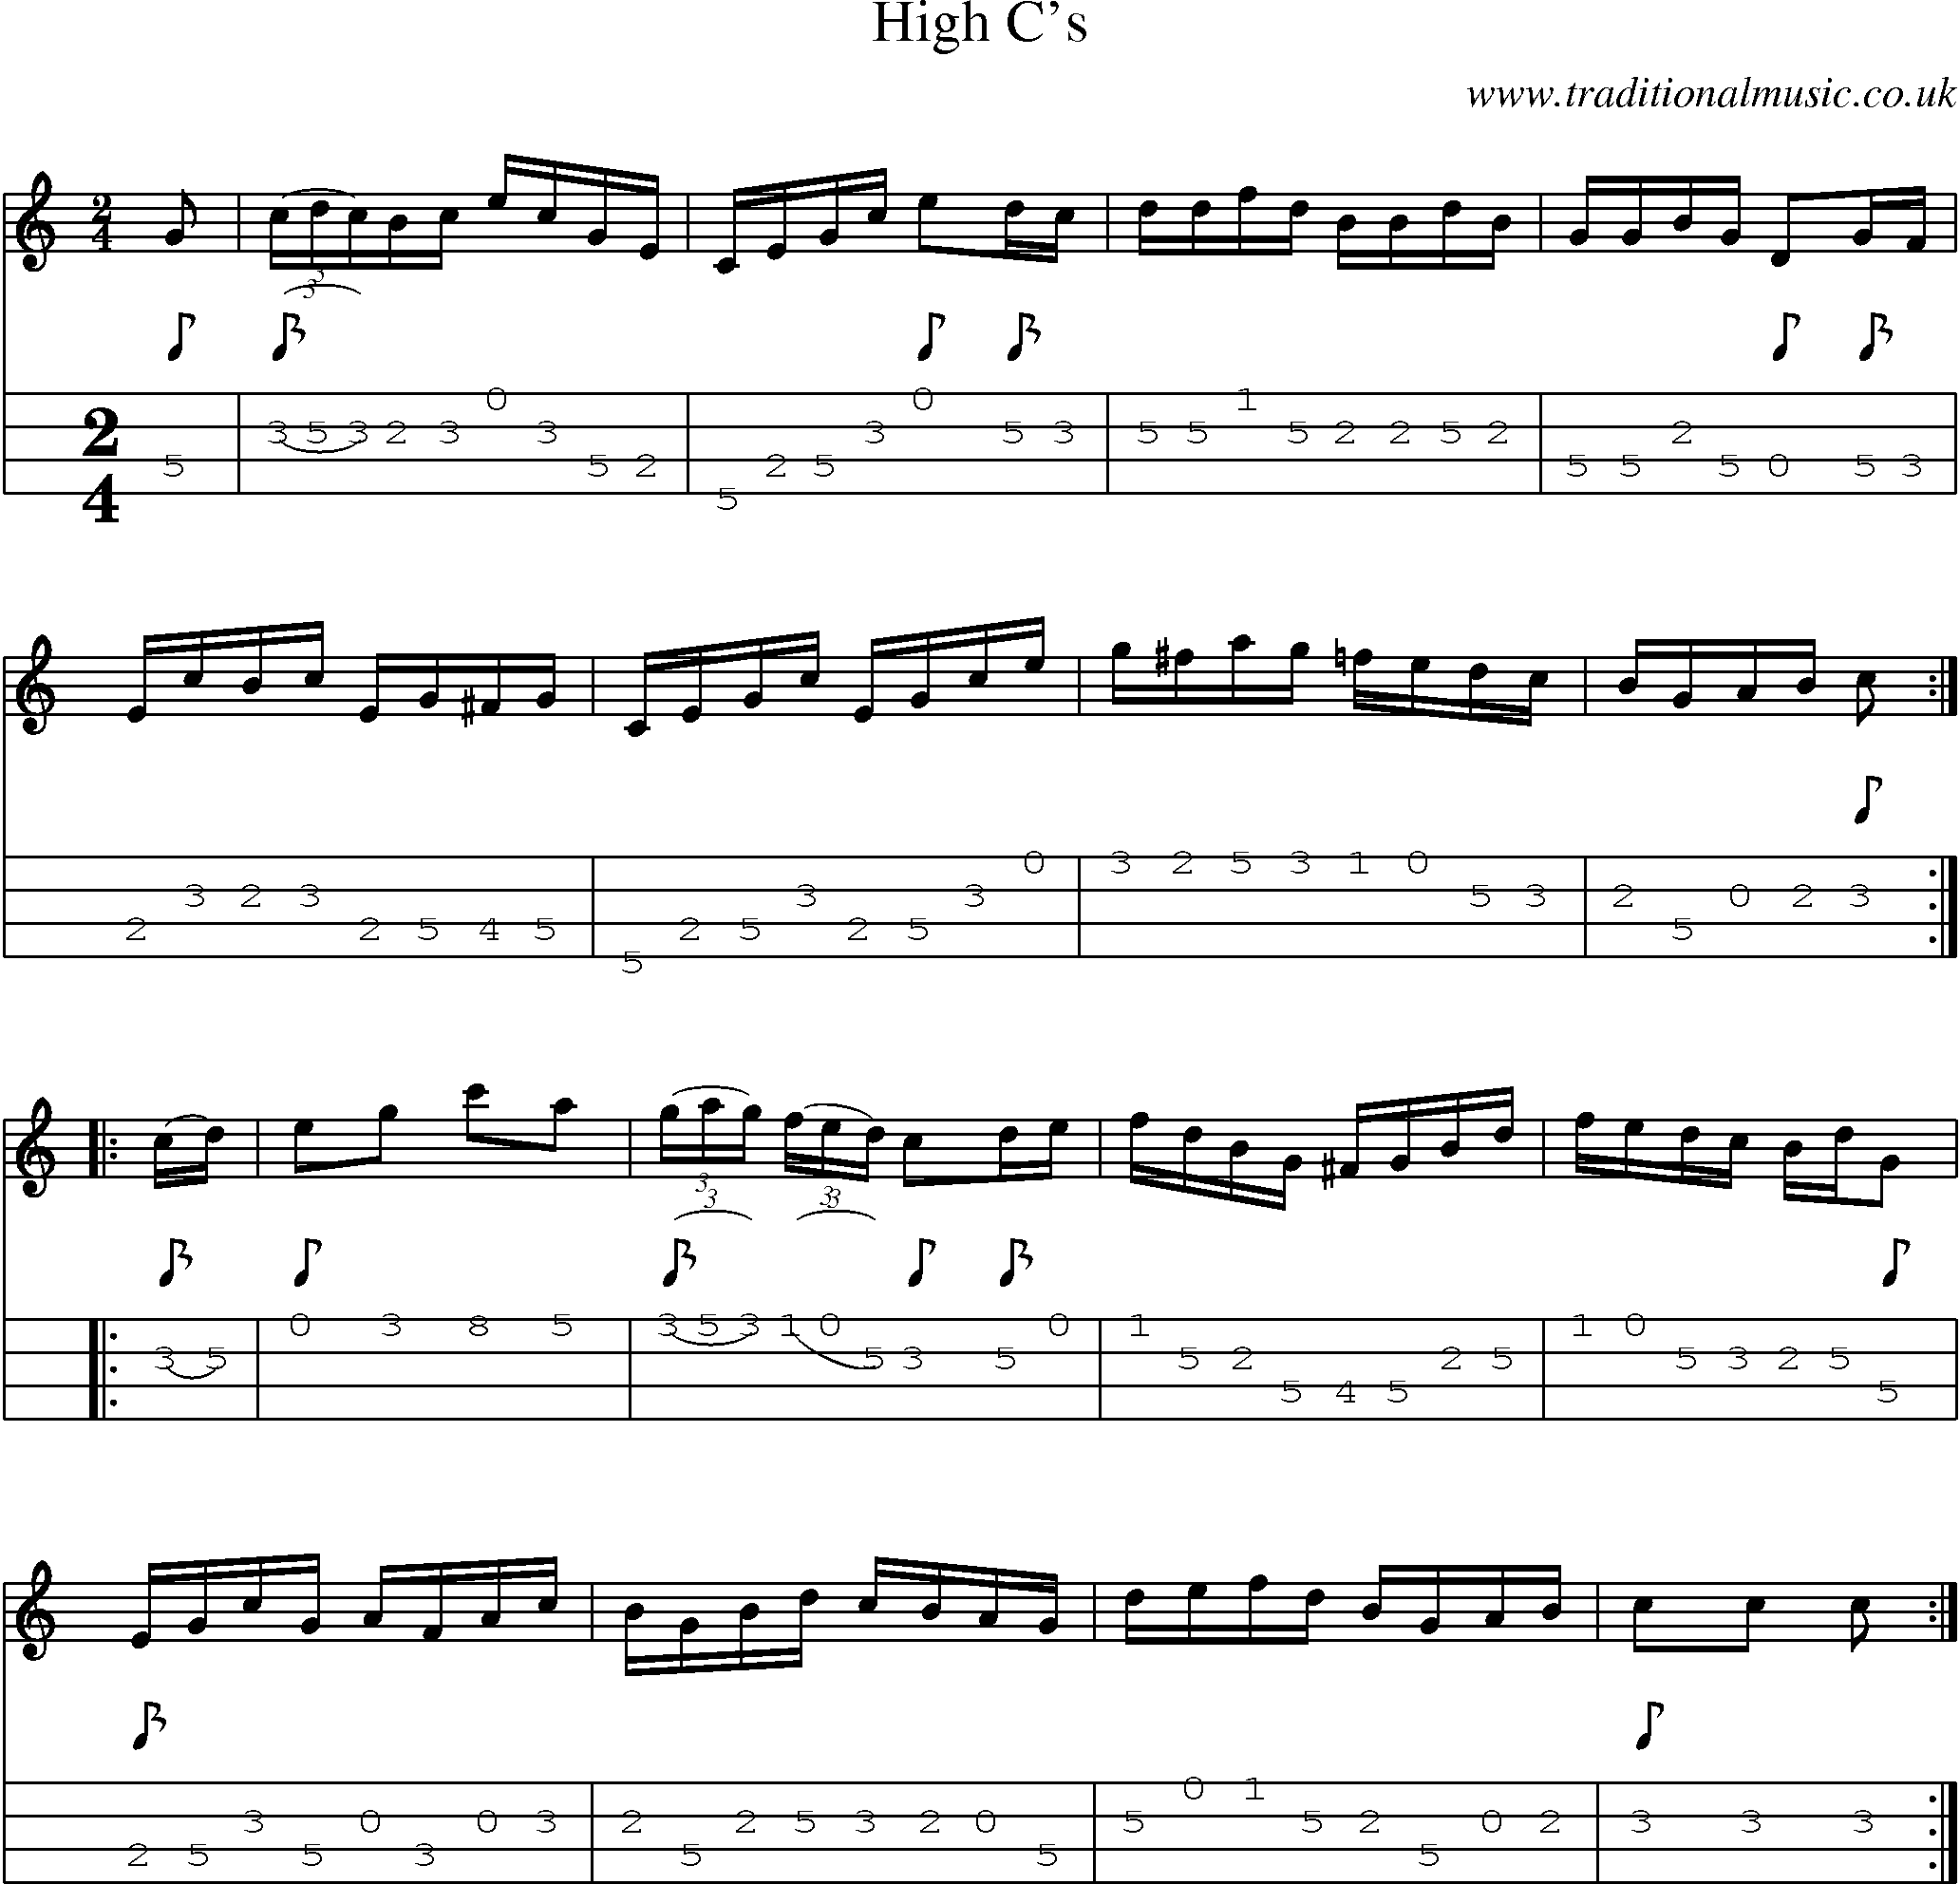 Music Score and Mandolin Tabs for High Cs